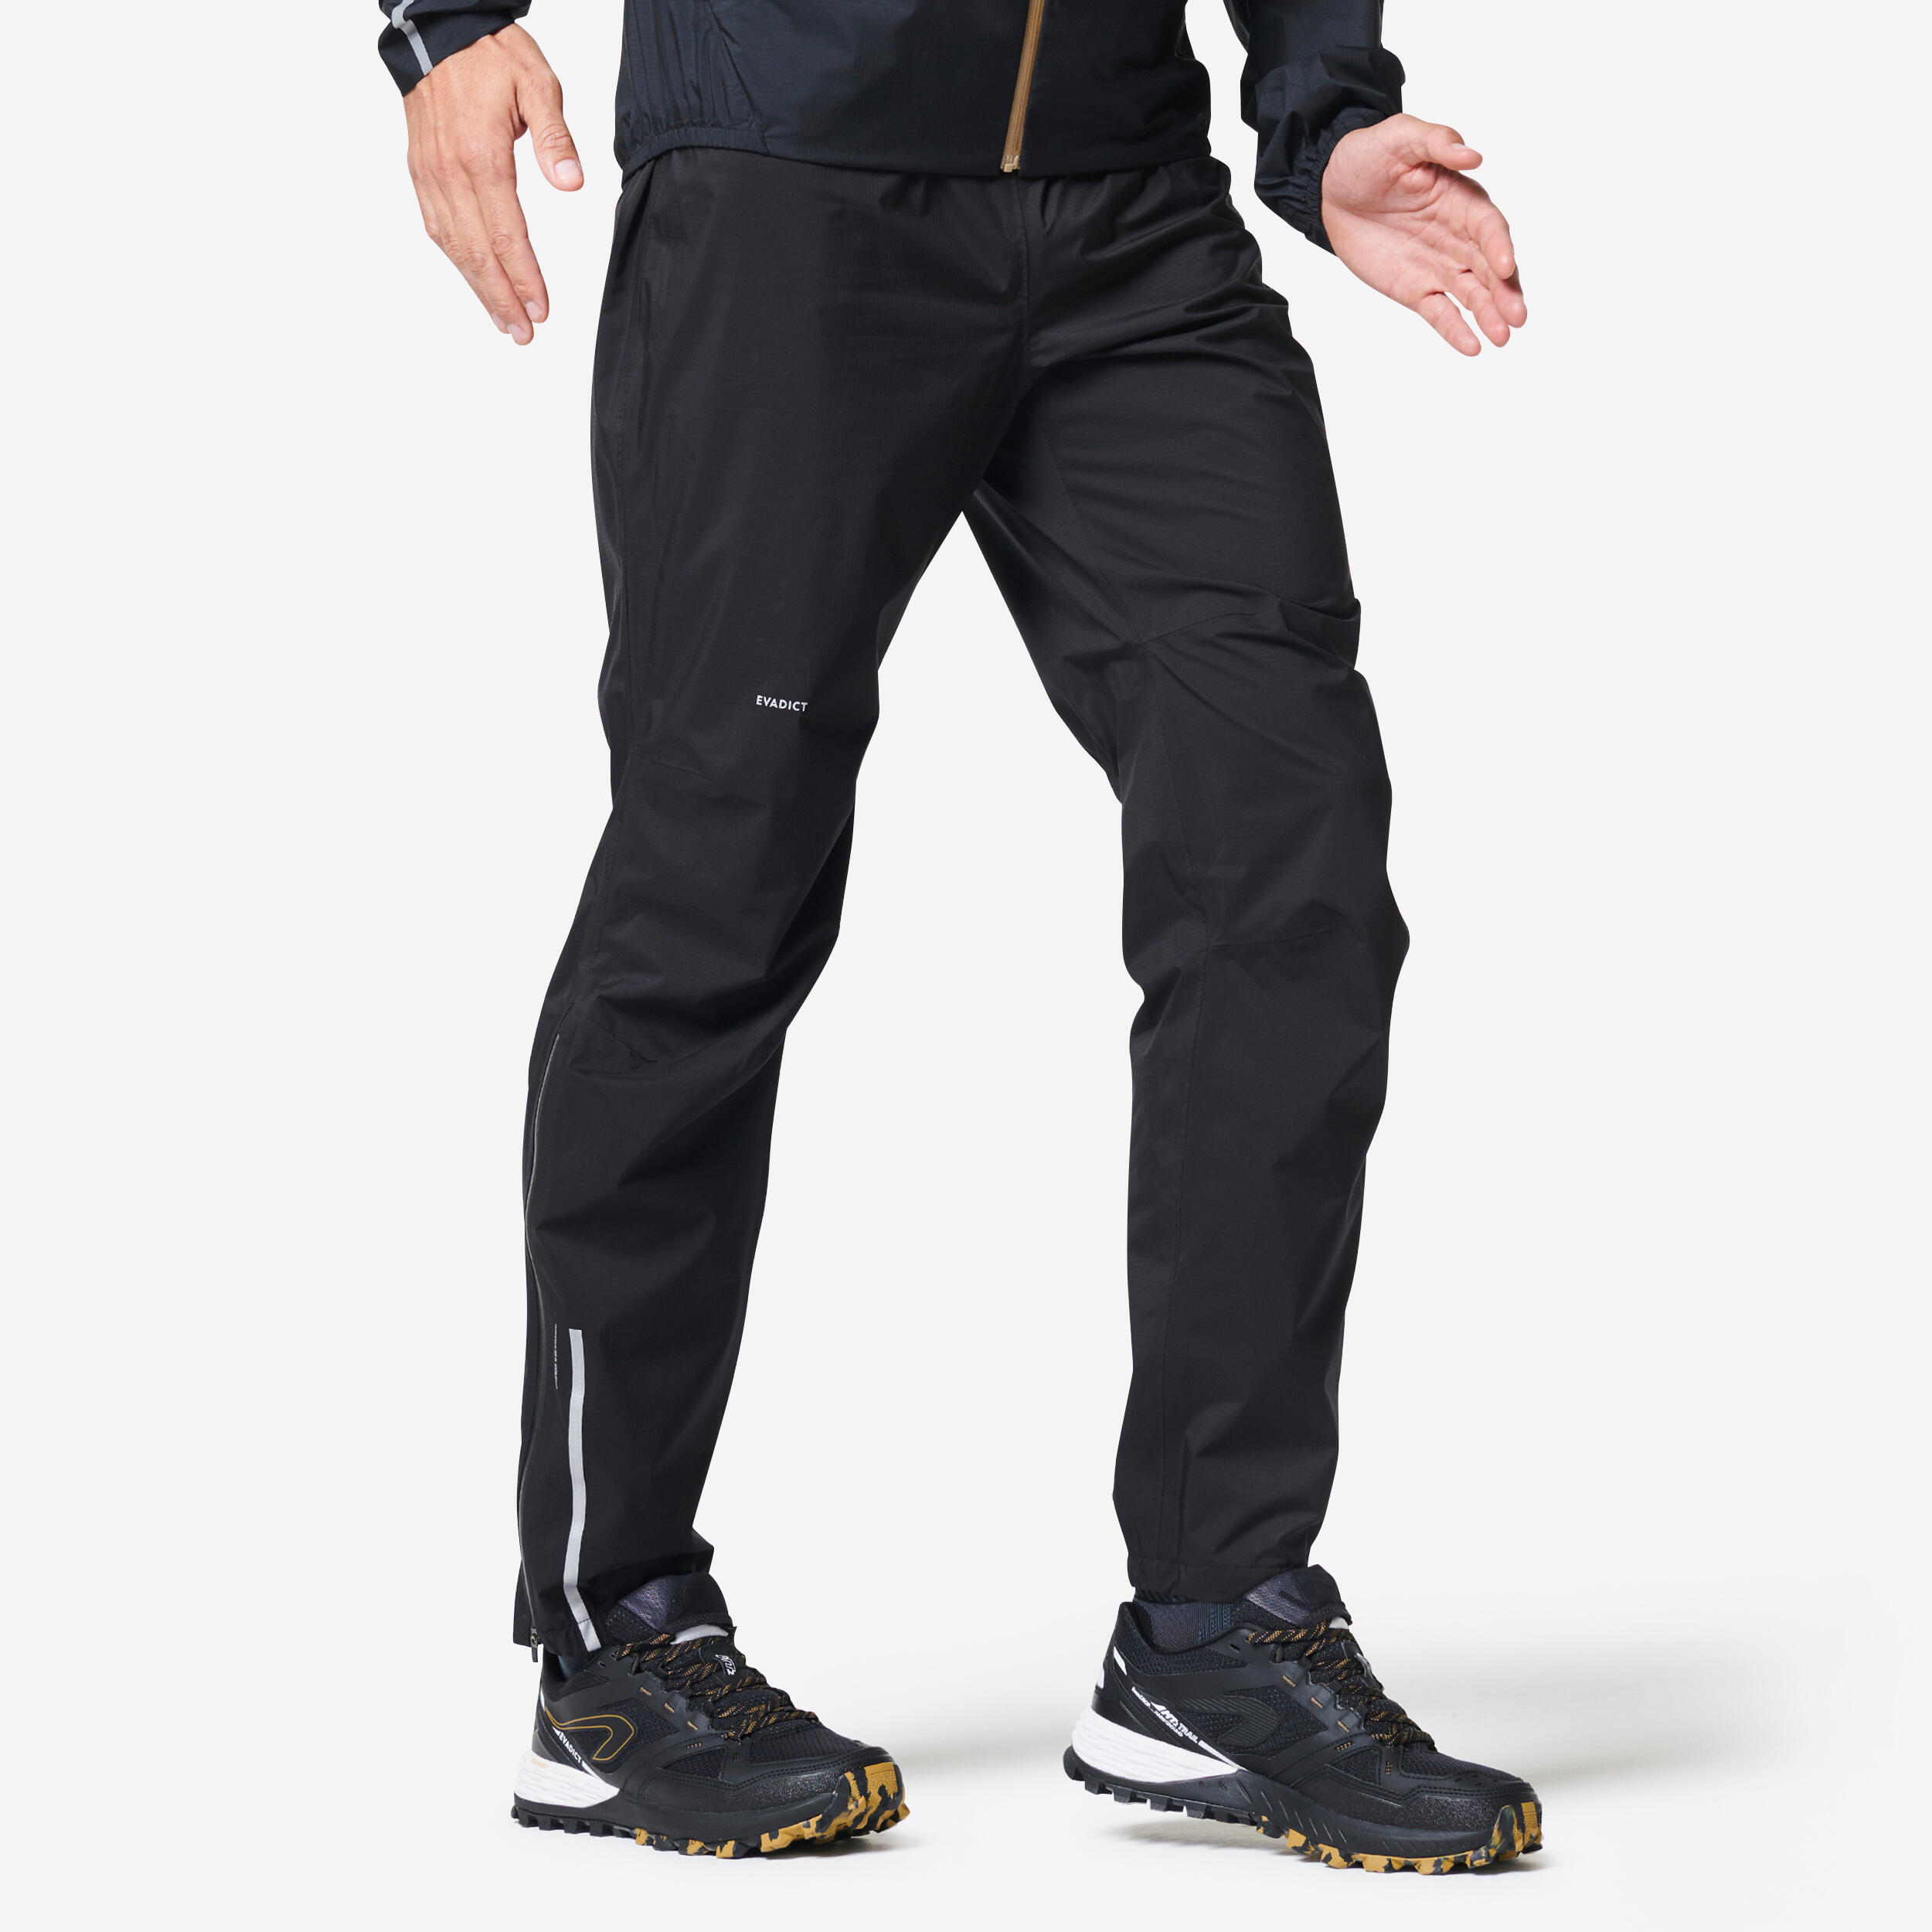 Women's waterproof sailing overtrousers 100 - Navy TRIBORD | Decathlon